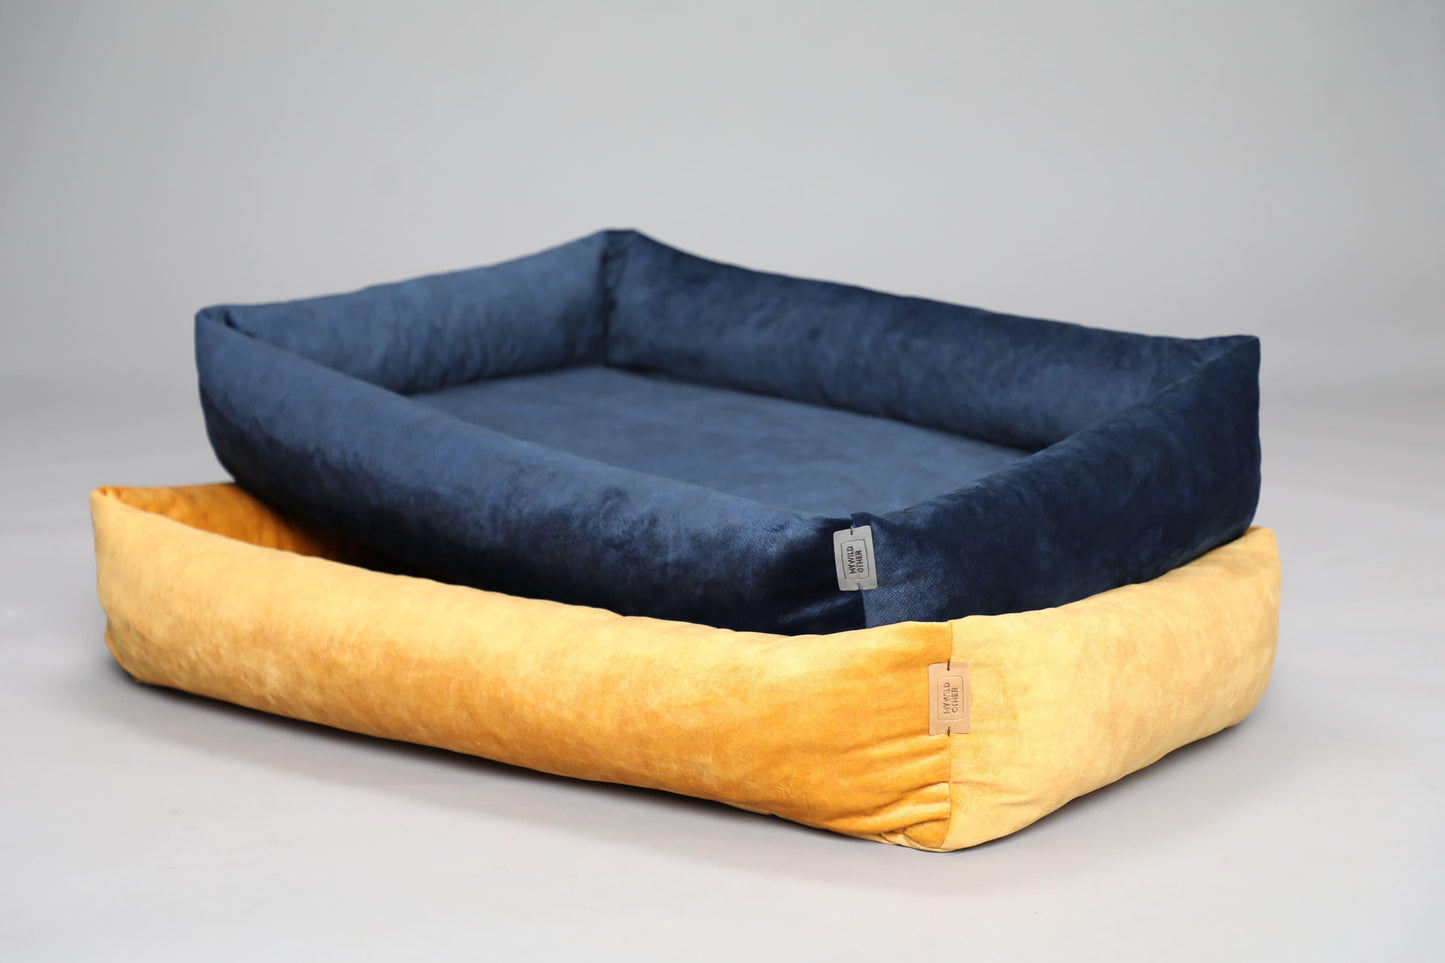 Premium dog bed with sides | 2-sided | ROYAL BLUE - premium dog goods handmade in Europe by My Wild Other